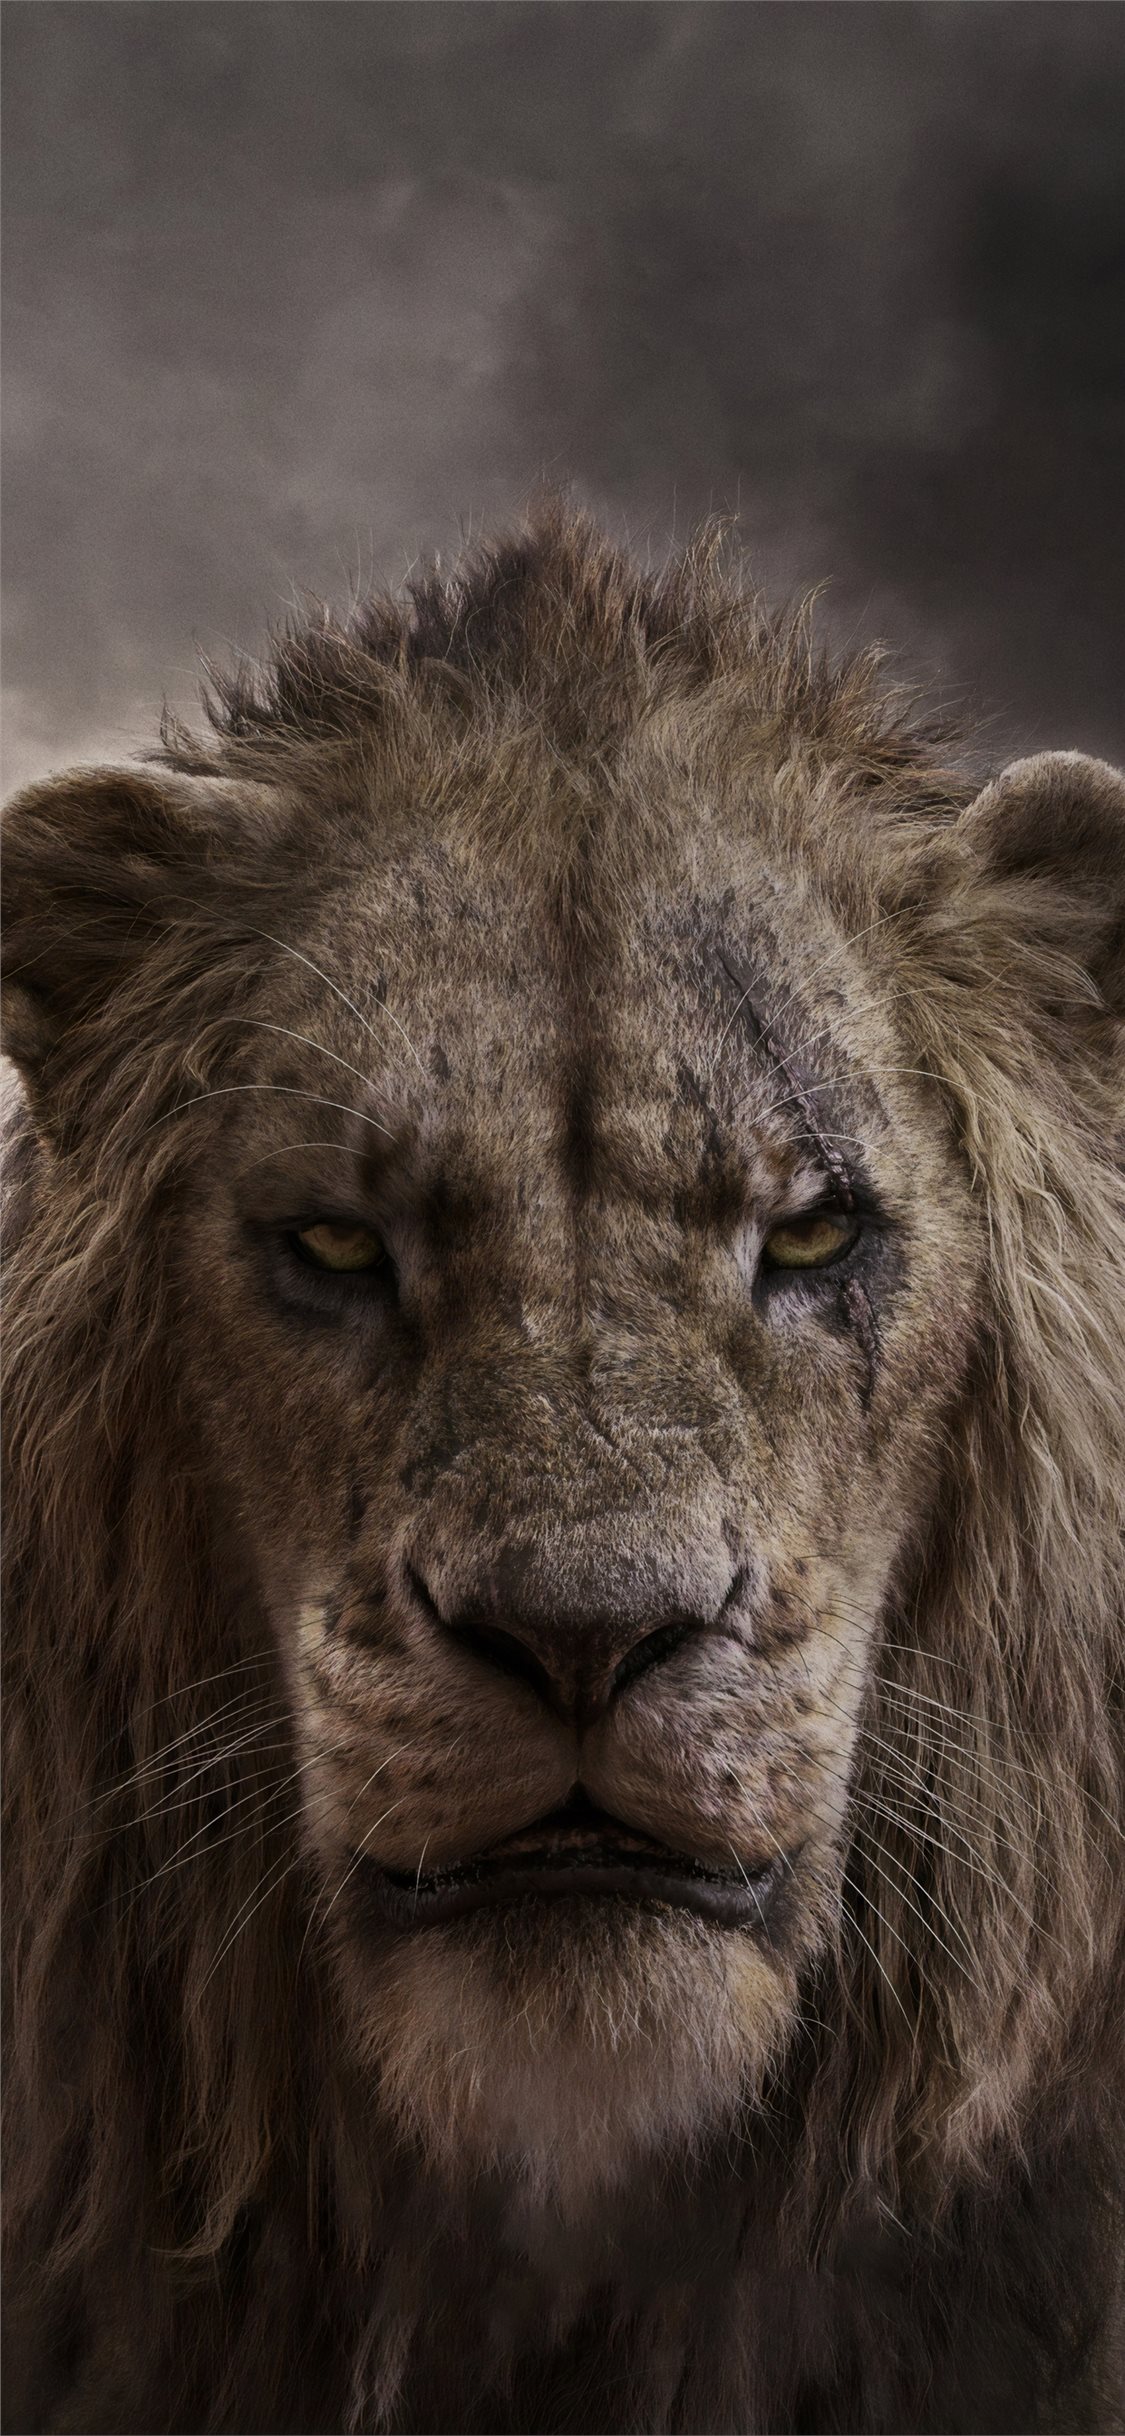 chiwetel ejiofor as scar in the lion king 2019 4k iPhone X Wallpaper Free Download